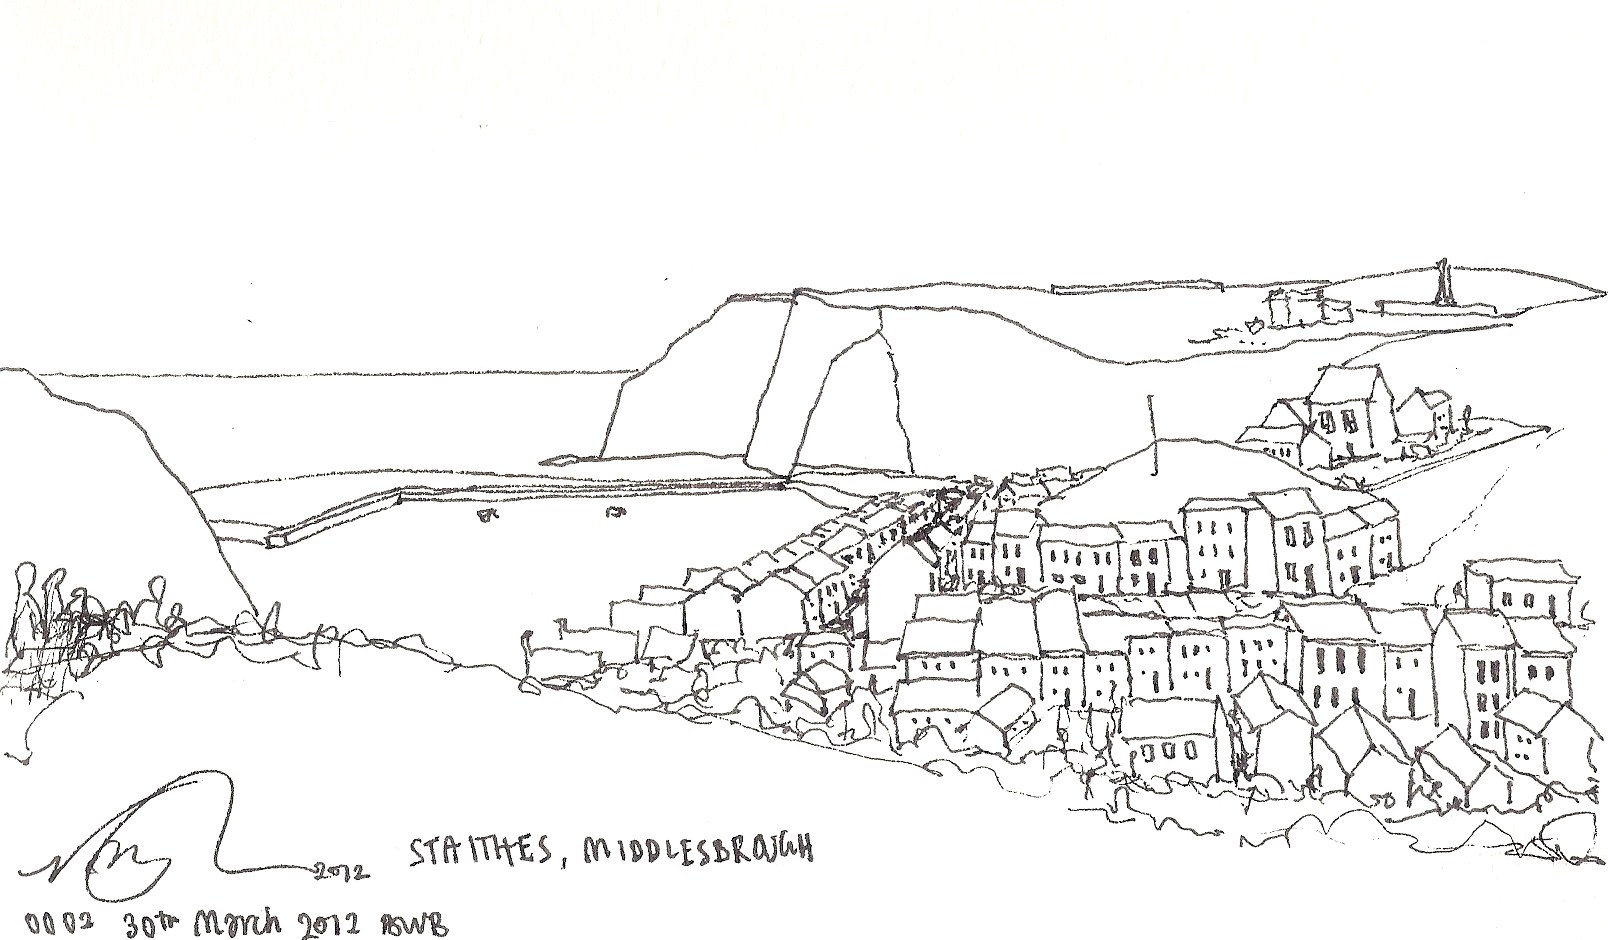 Staithes near Middlesbrough, 2008